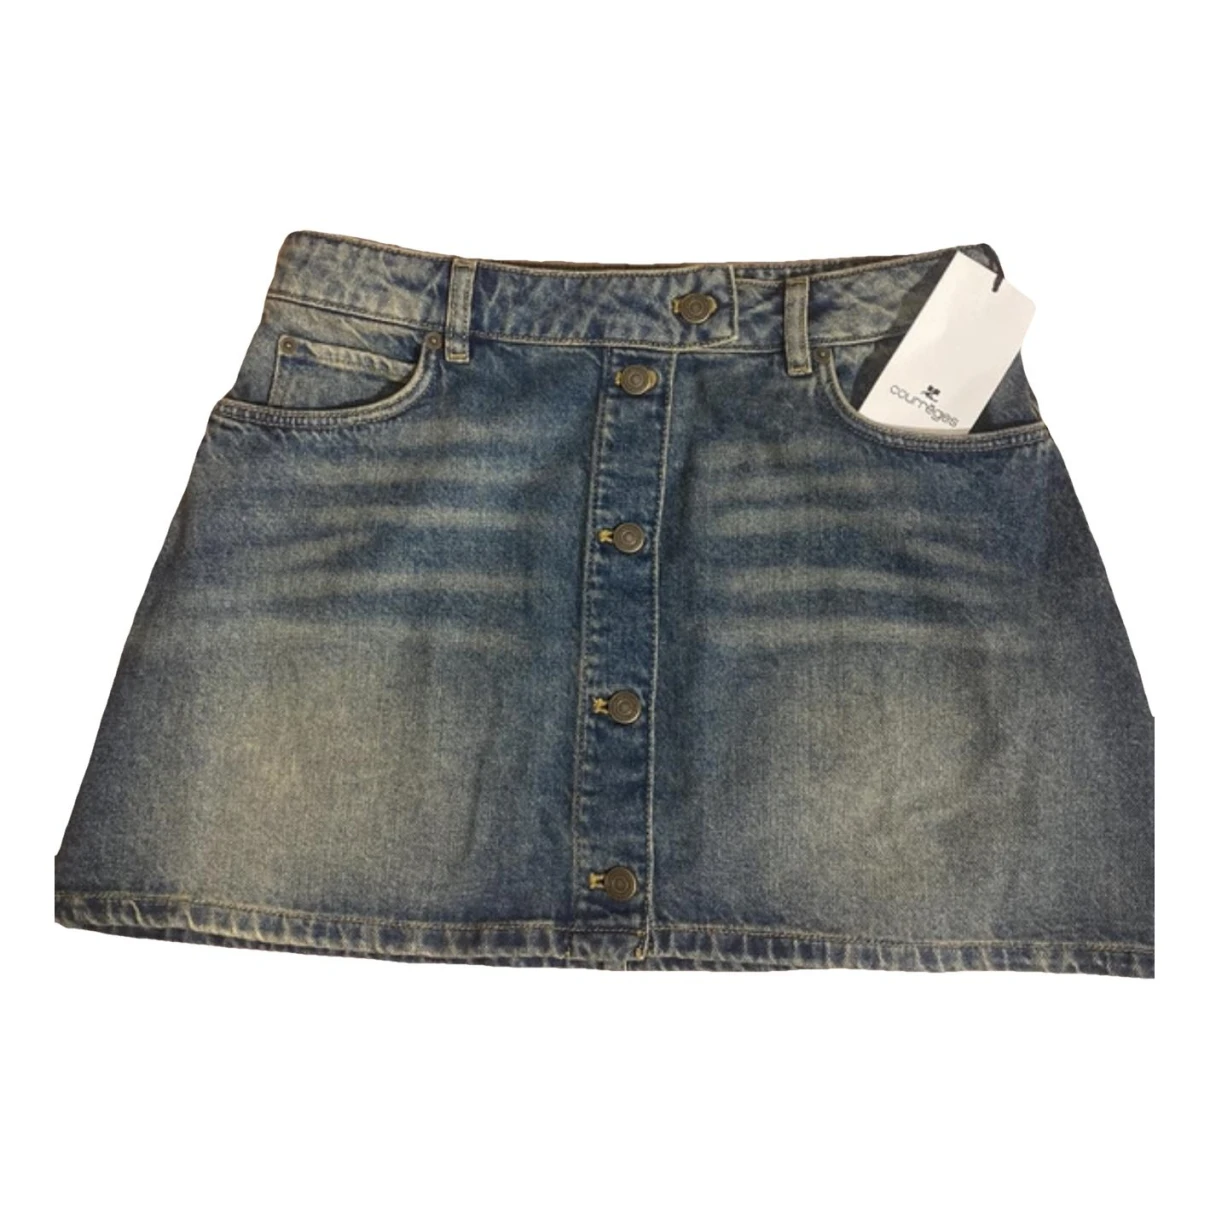 Pre-owned Courrã¨ges Mini Skirt In Blue